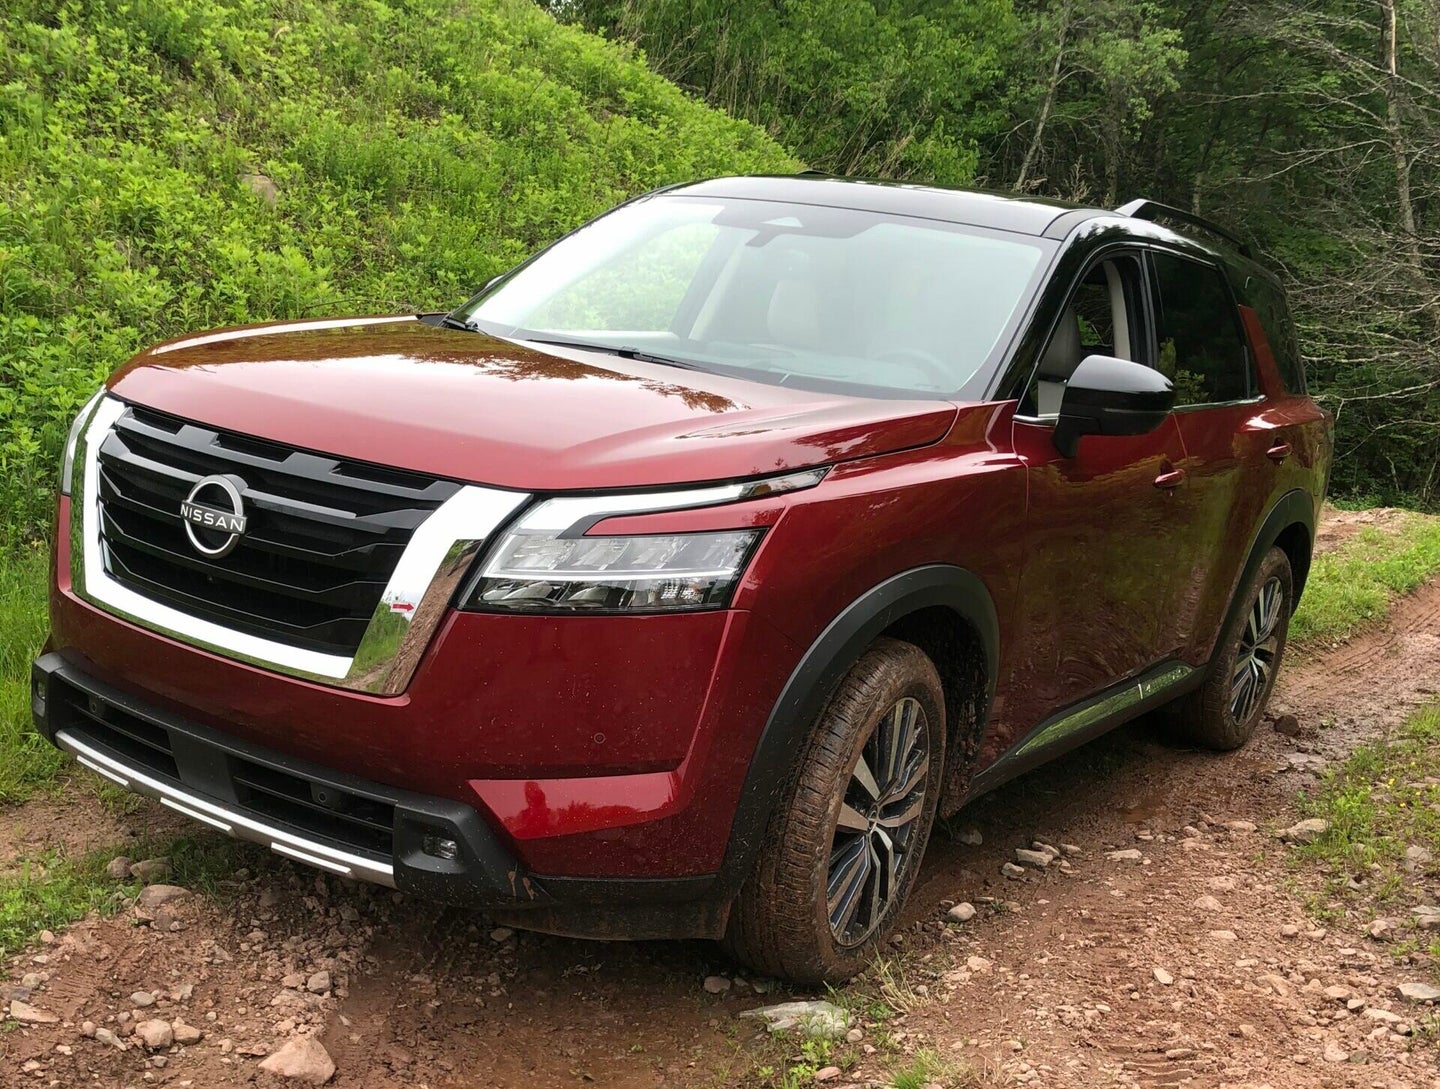 Test-driving the new 2022 Nissan Pathfinder on a truck review.